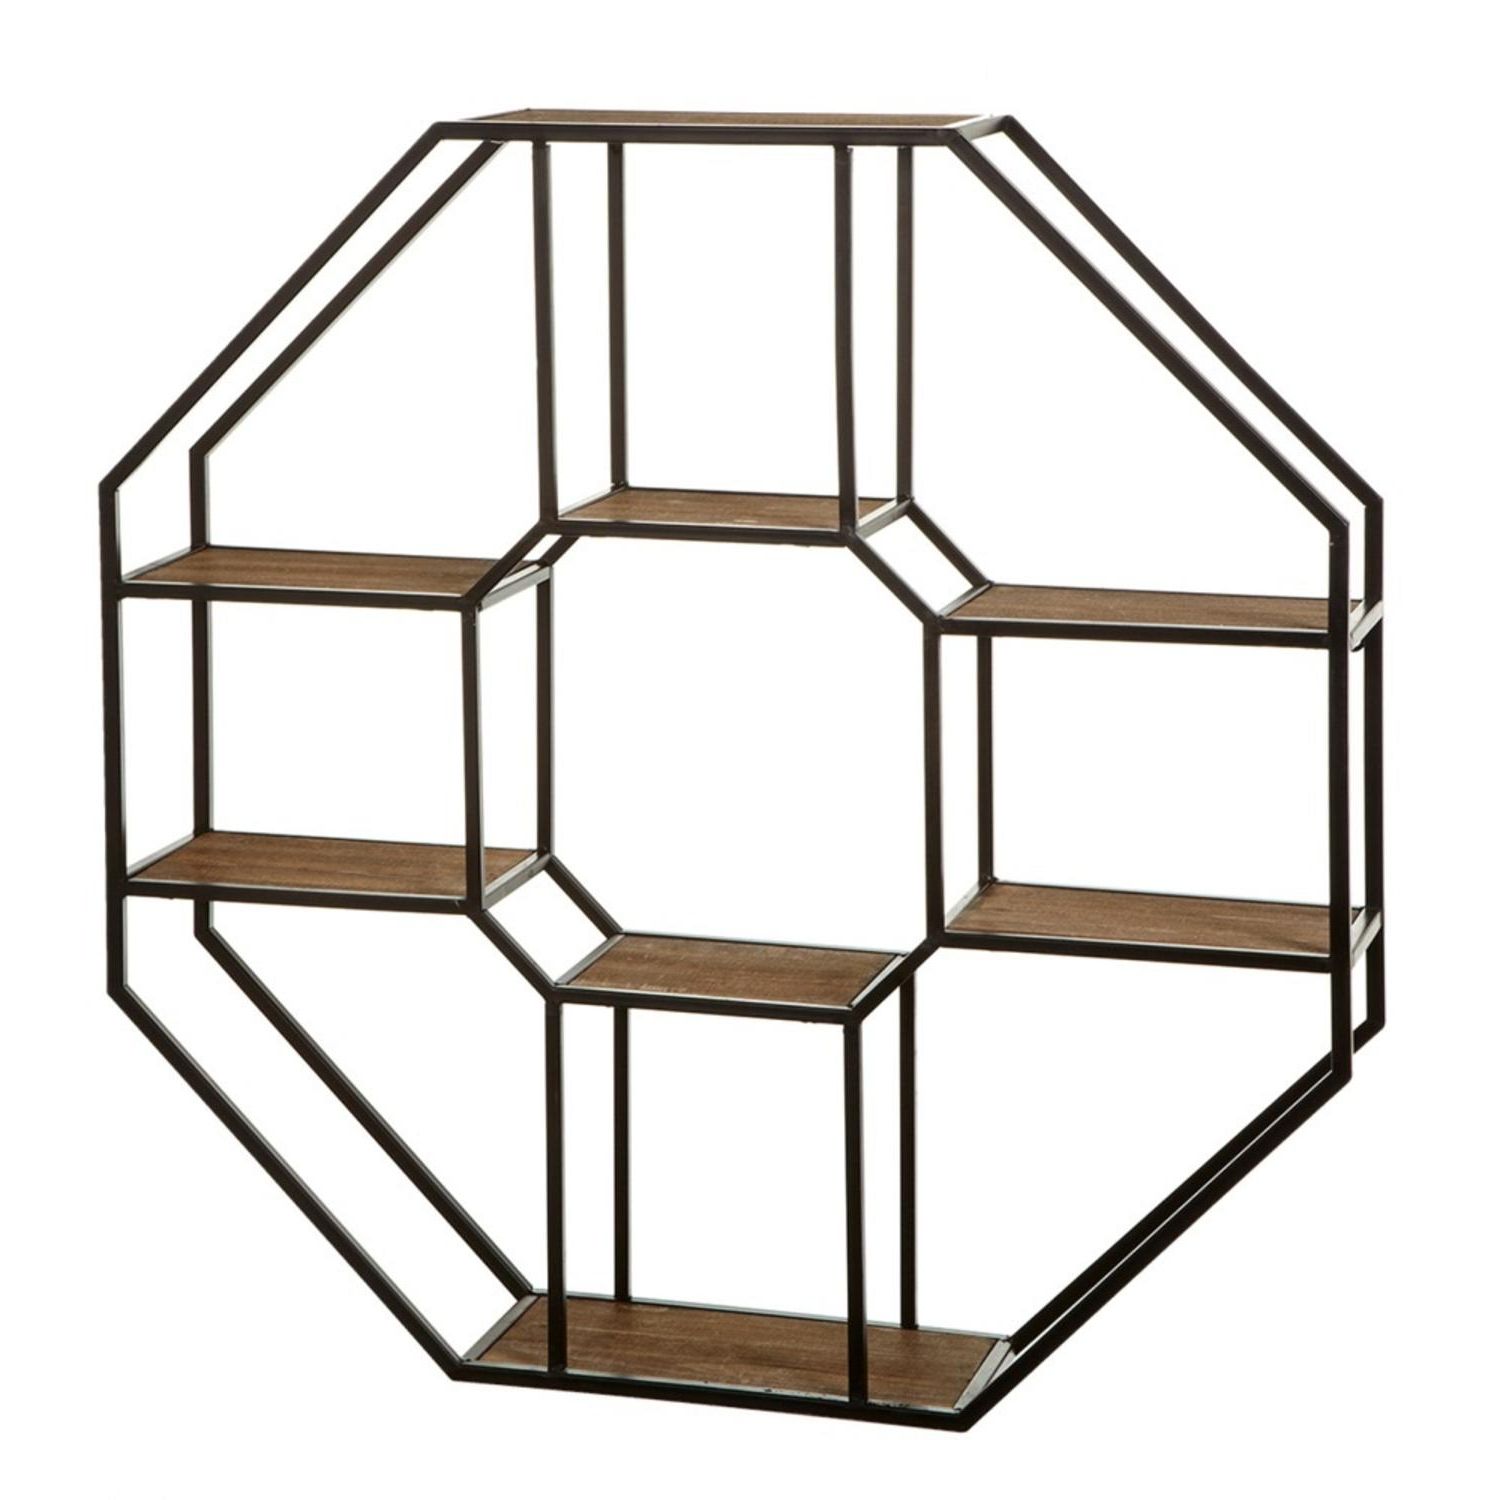 Hexagons Wood Wall Art With Well Known Black And Brown Decorative Metal And Wood Hexagon Wall (View 15 of 20)